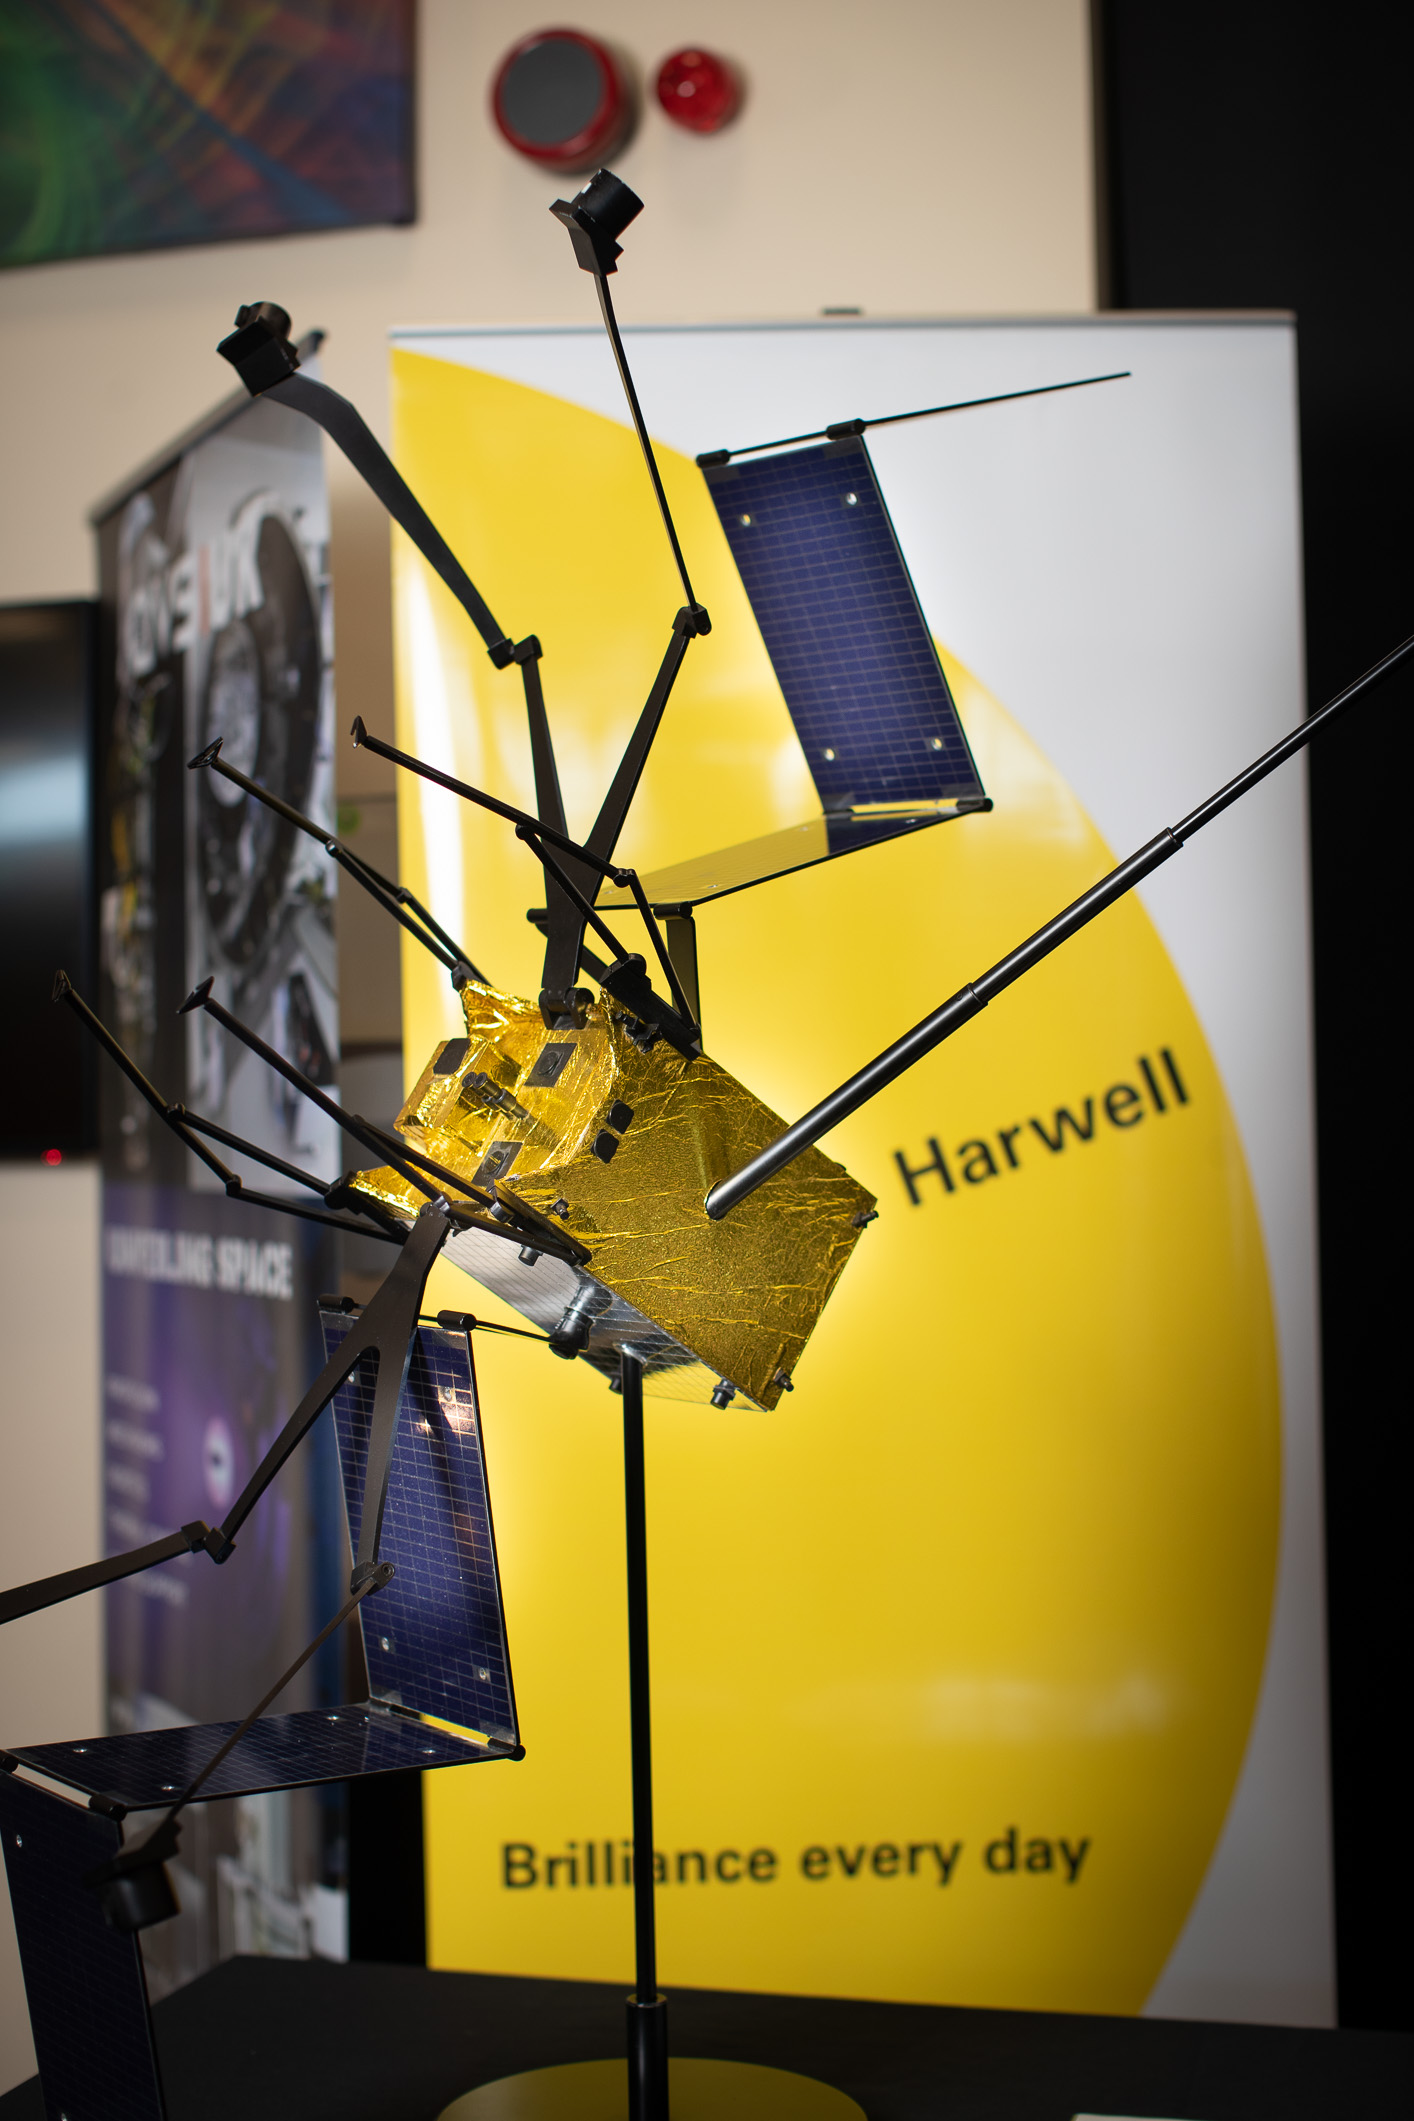 Harwell Space Cluster on track to hit 2030 target of 200 space organisations and 5,000 people